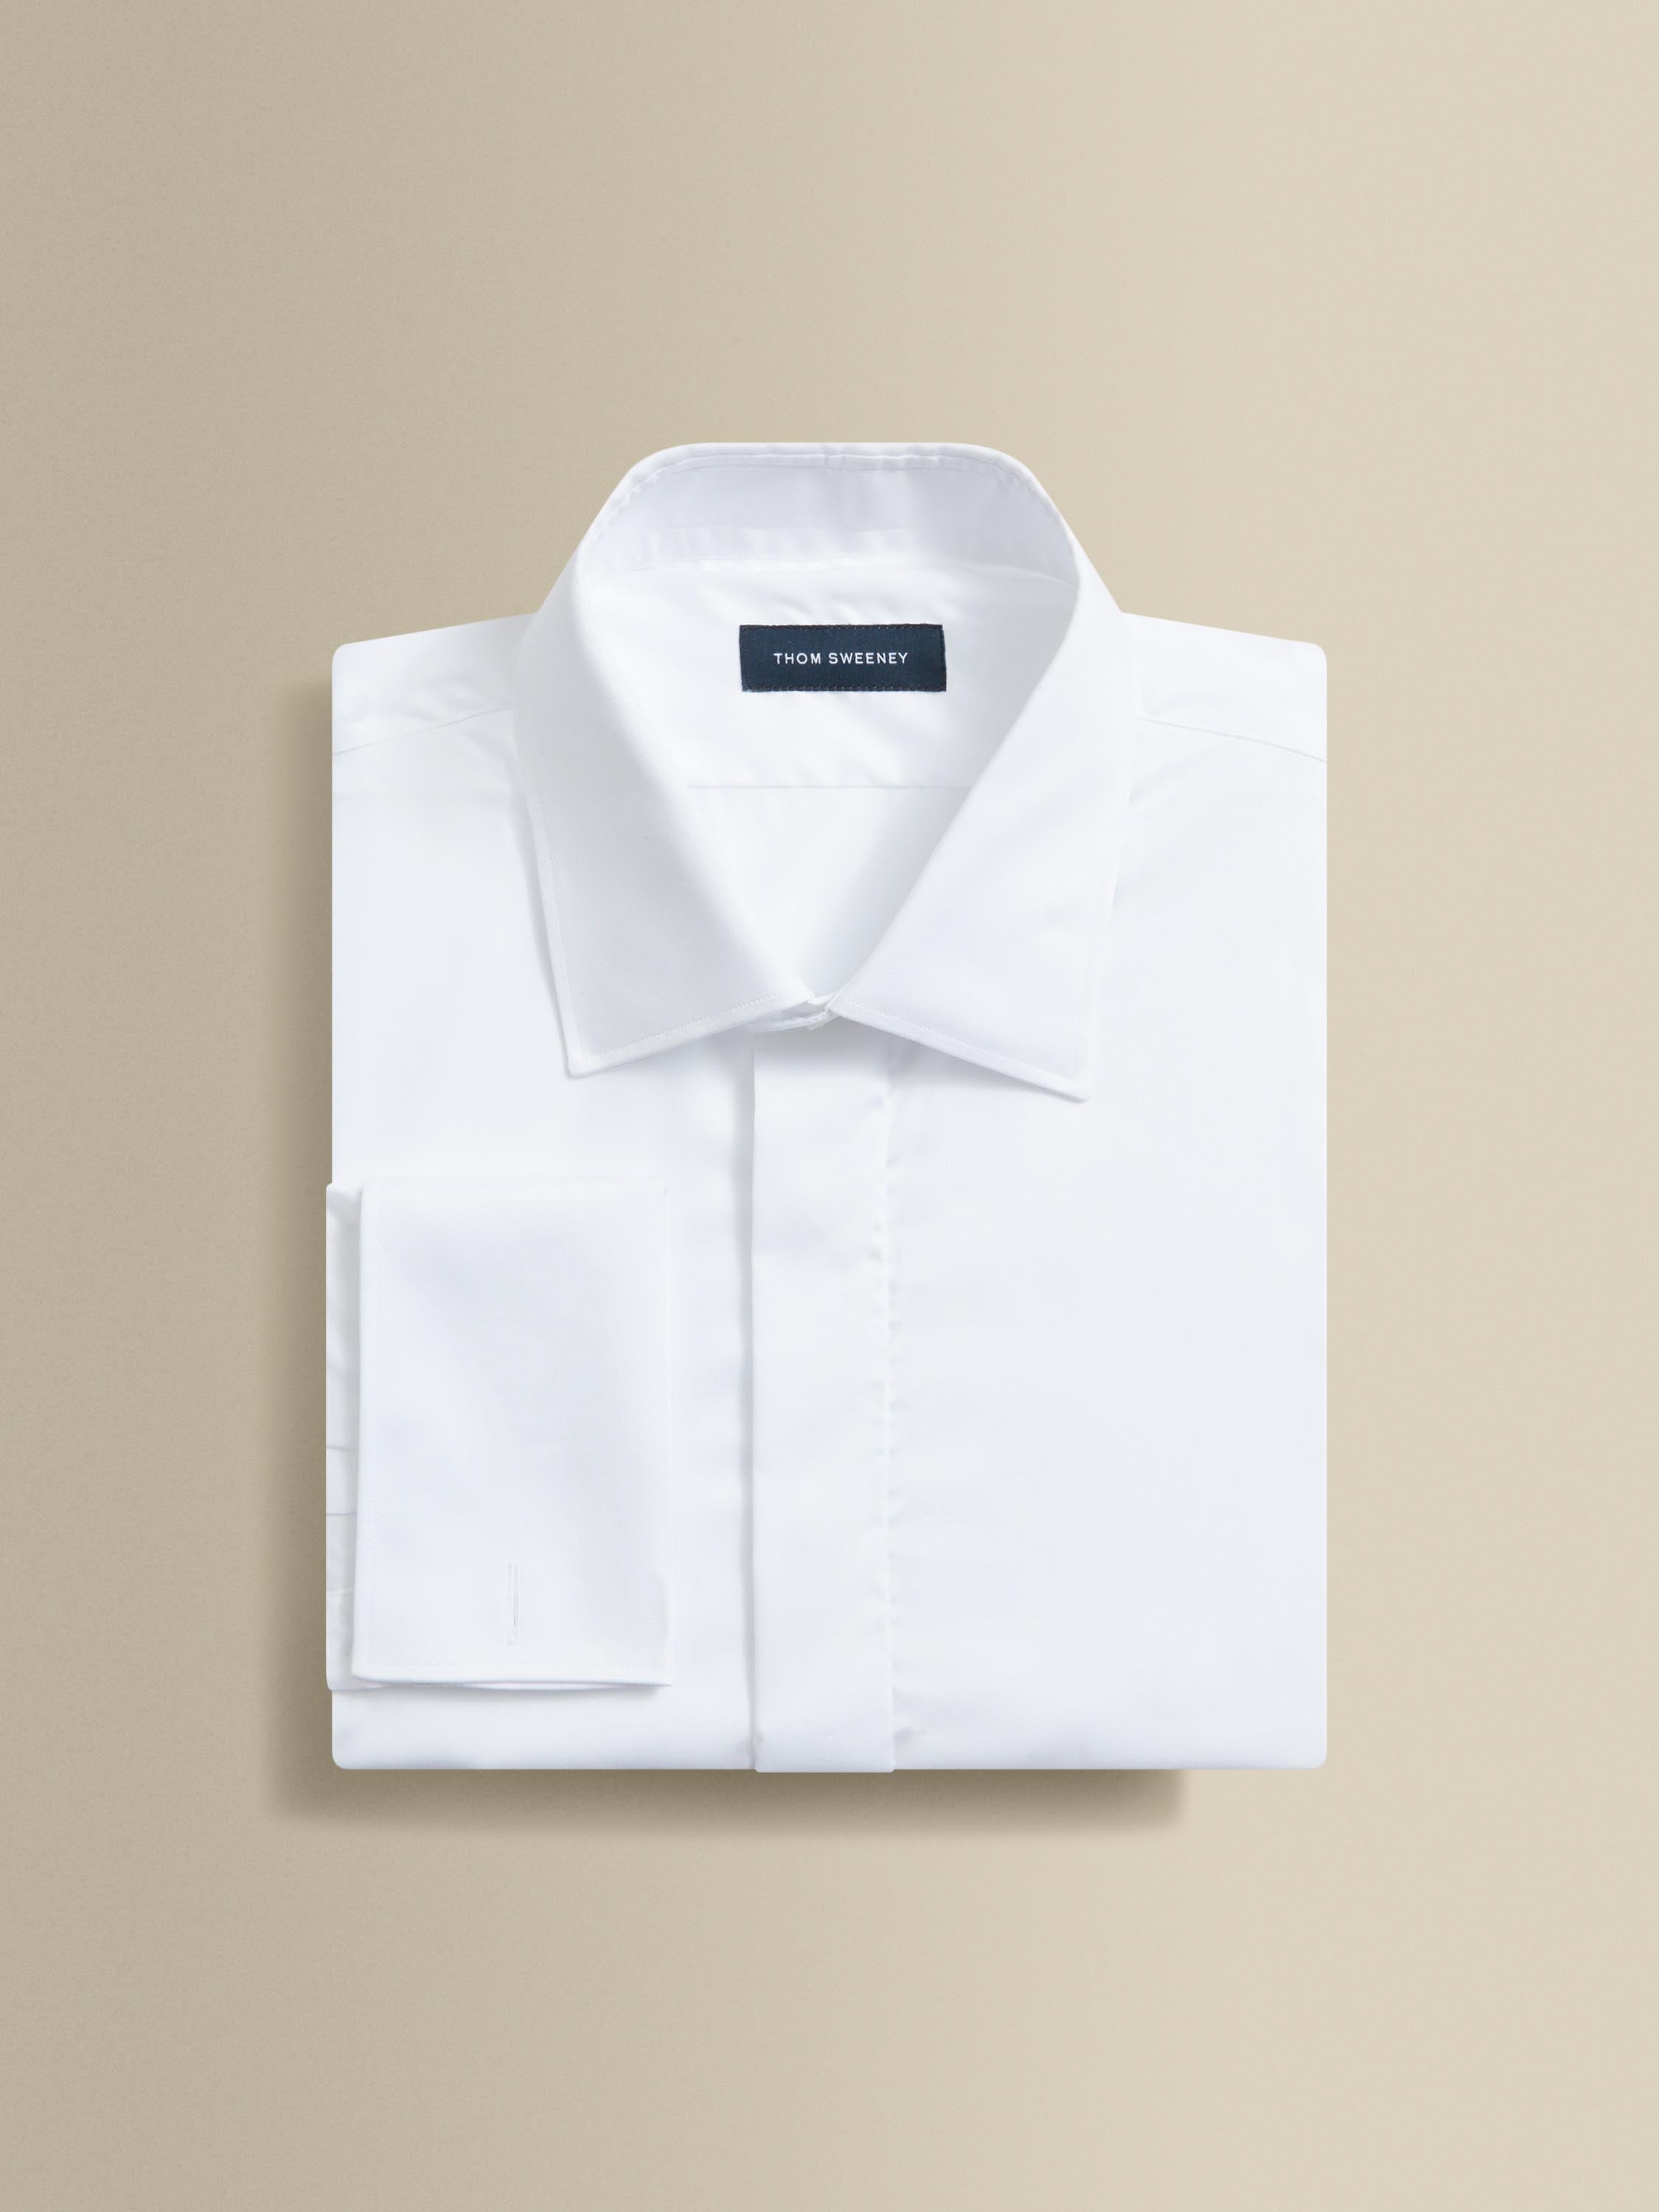 Cotton Stretch Dress Shirt White Product Front Folded